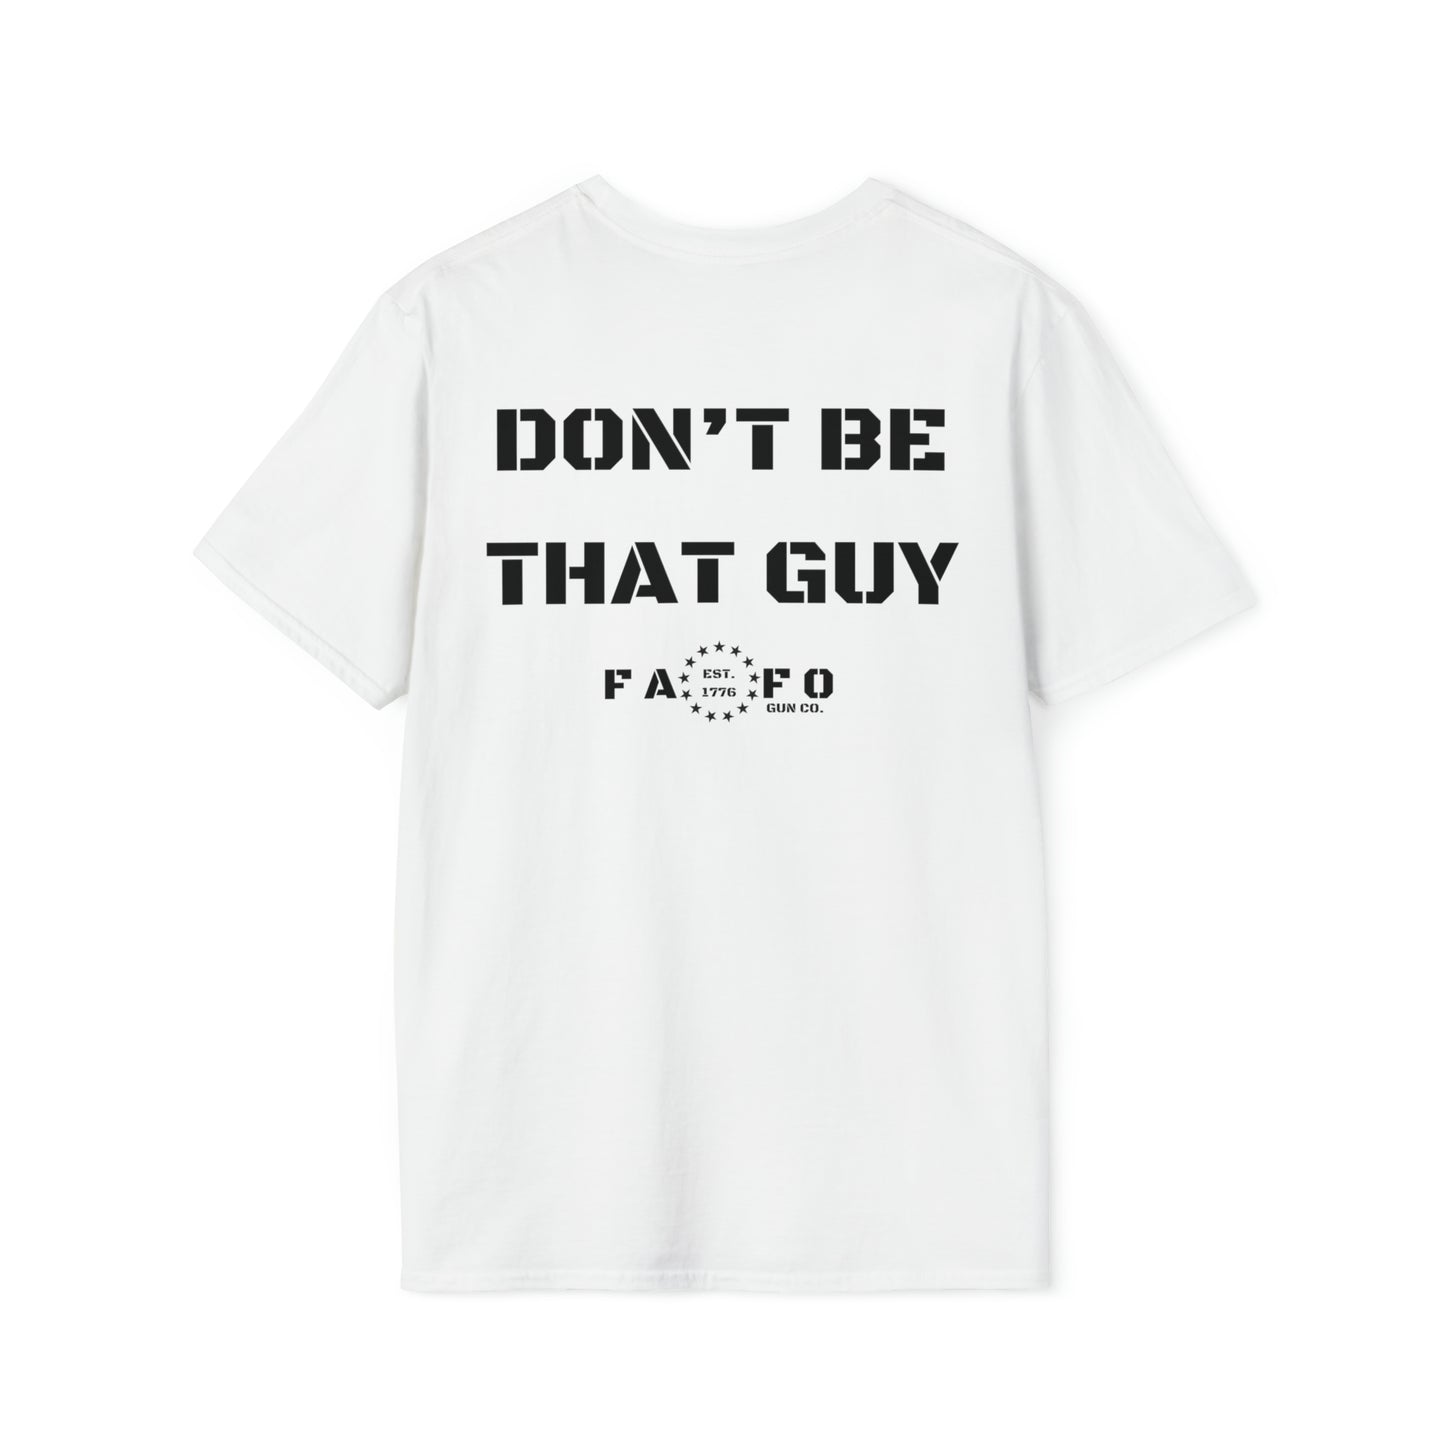 “DON’T BE THAT GUY” Tee (Print on Back)